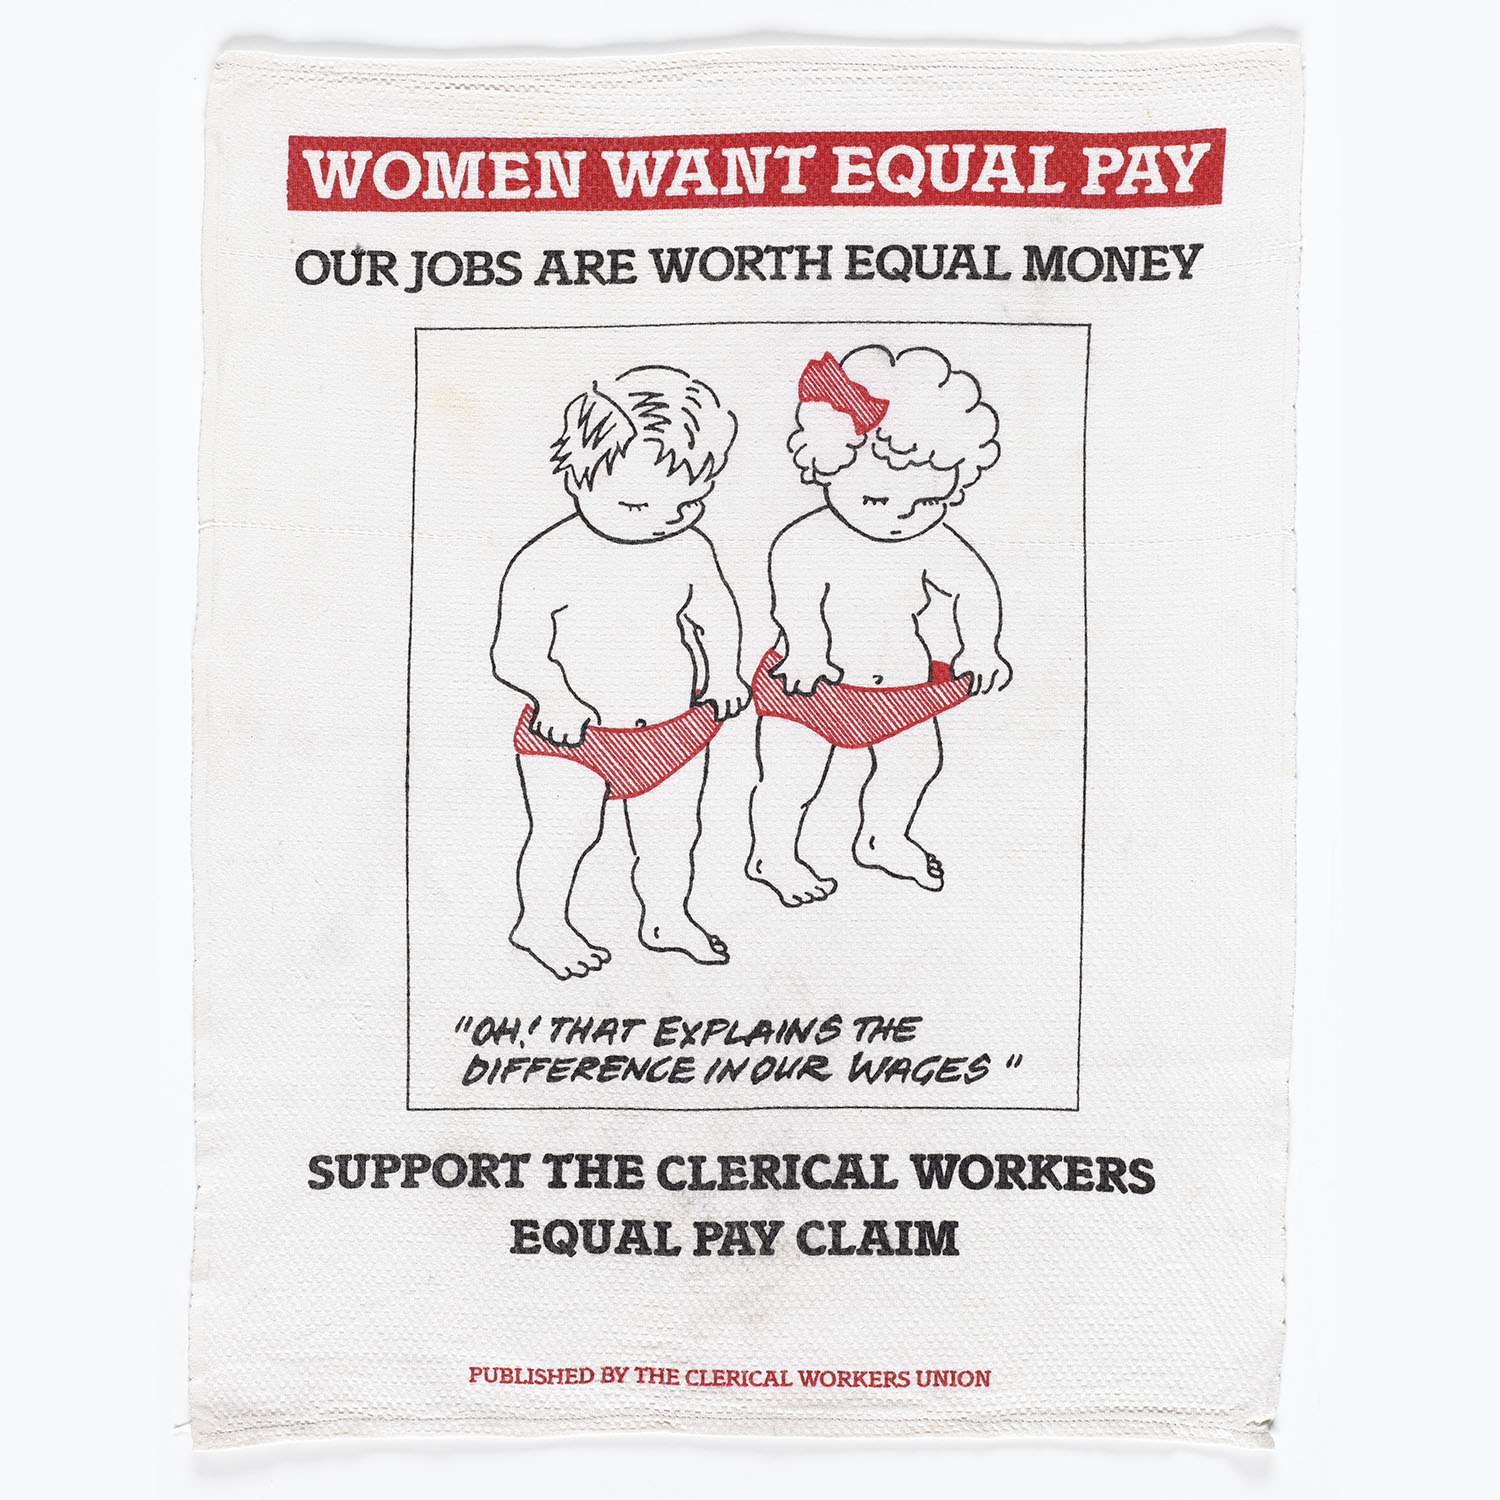 Tea towel with two children – a boy and a girl – looking down into their underpants. “Oh! That explains the difference in our wages” is written underneath. Support messaging is also included on the towel